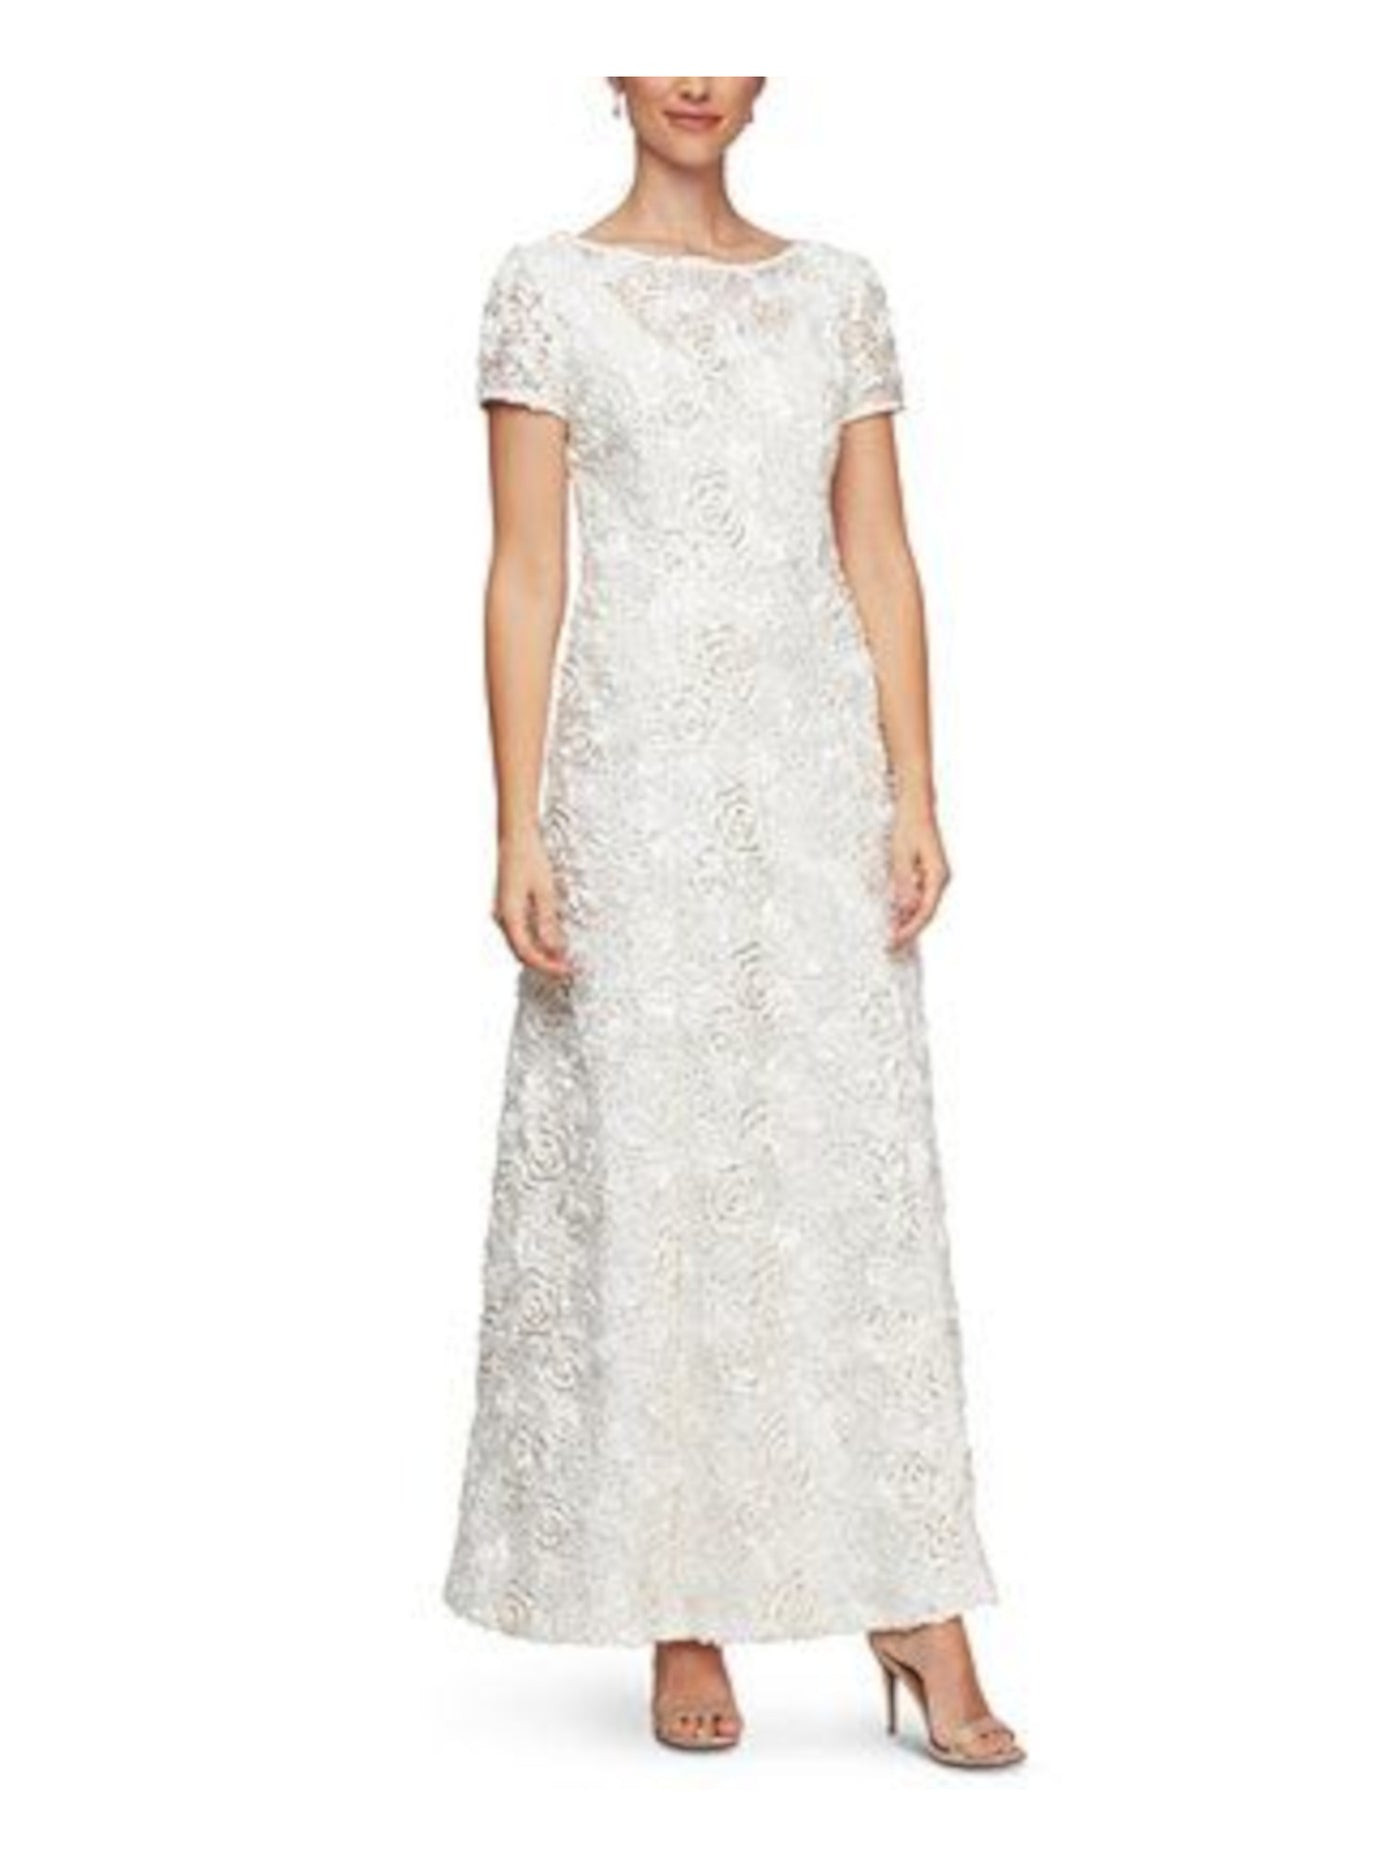 ALEX EVENINGS Womens Ivory Stretch Embroidered Lace Zippered Sequined Floral Short Sleeve Crew Neck Maxi Formal Gown Dress 18